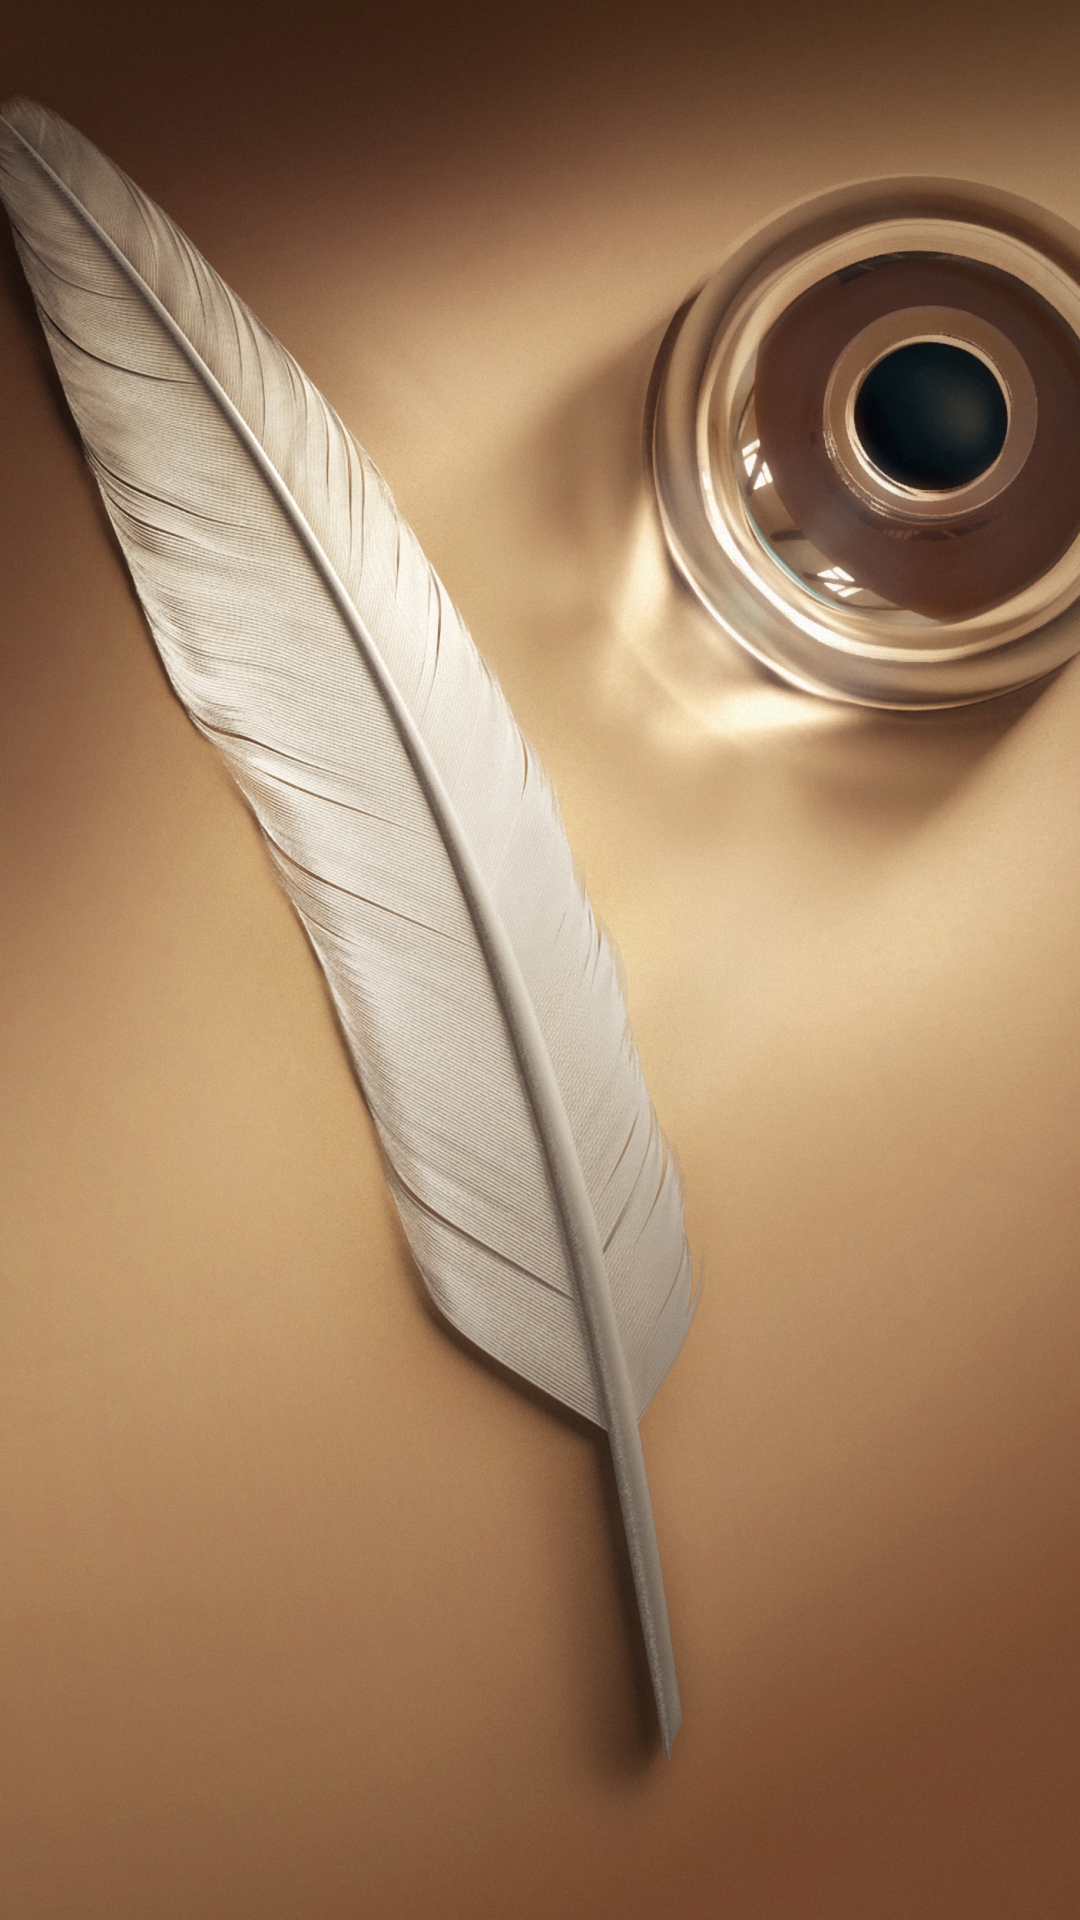 Hd Feathers Samsung Galaxy Note 3 Wallpapers - Samsung Feather Wallpaper Hd - HD Wallpaper 